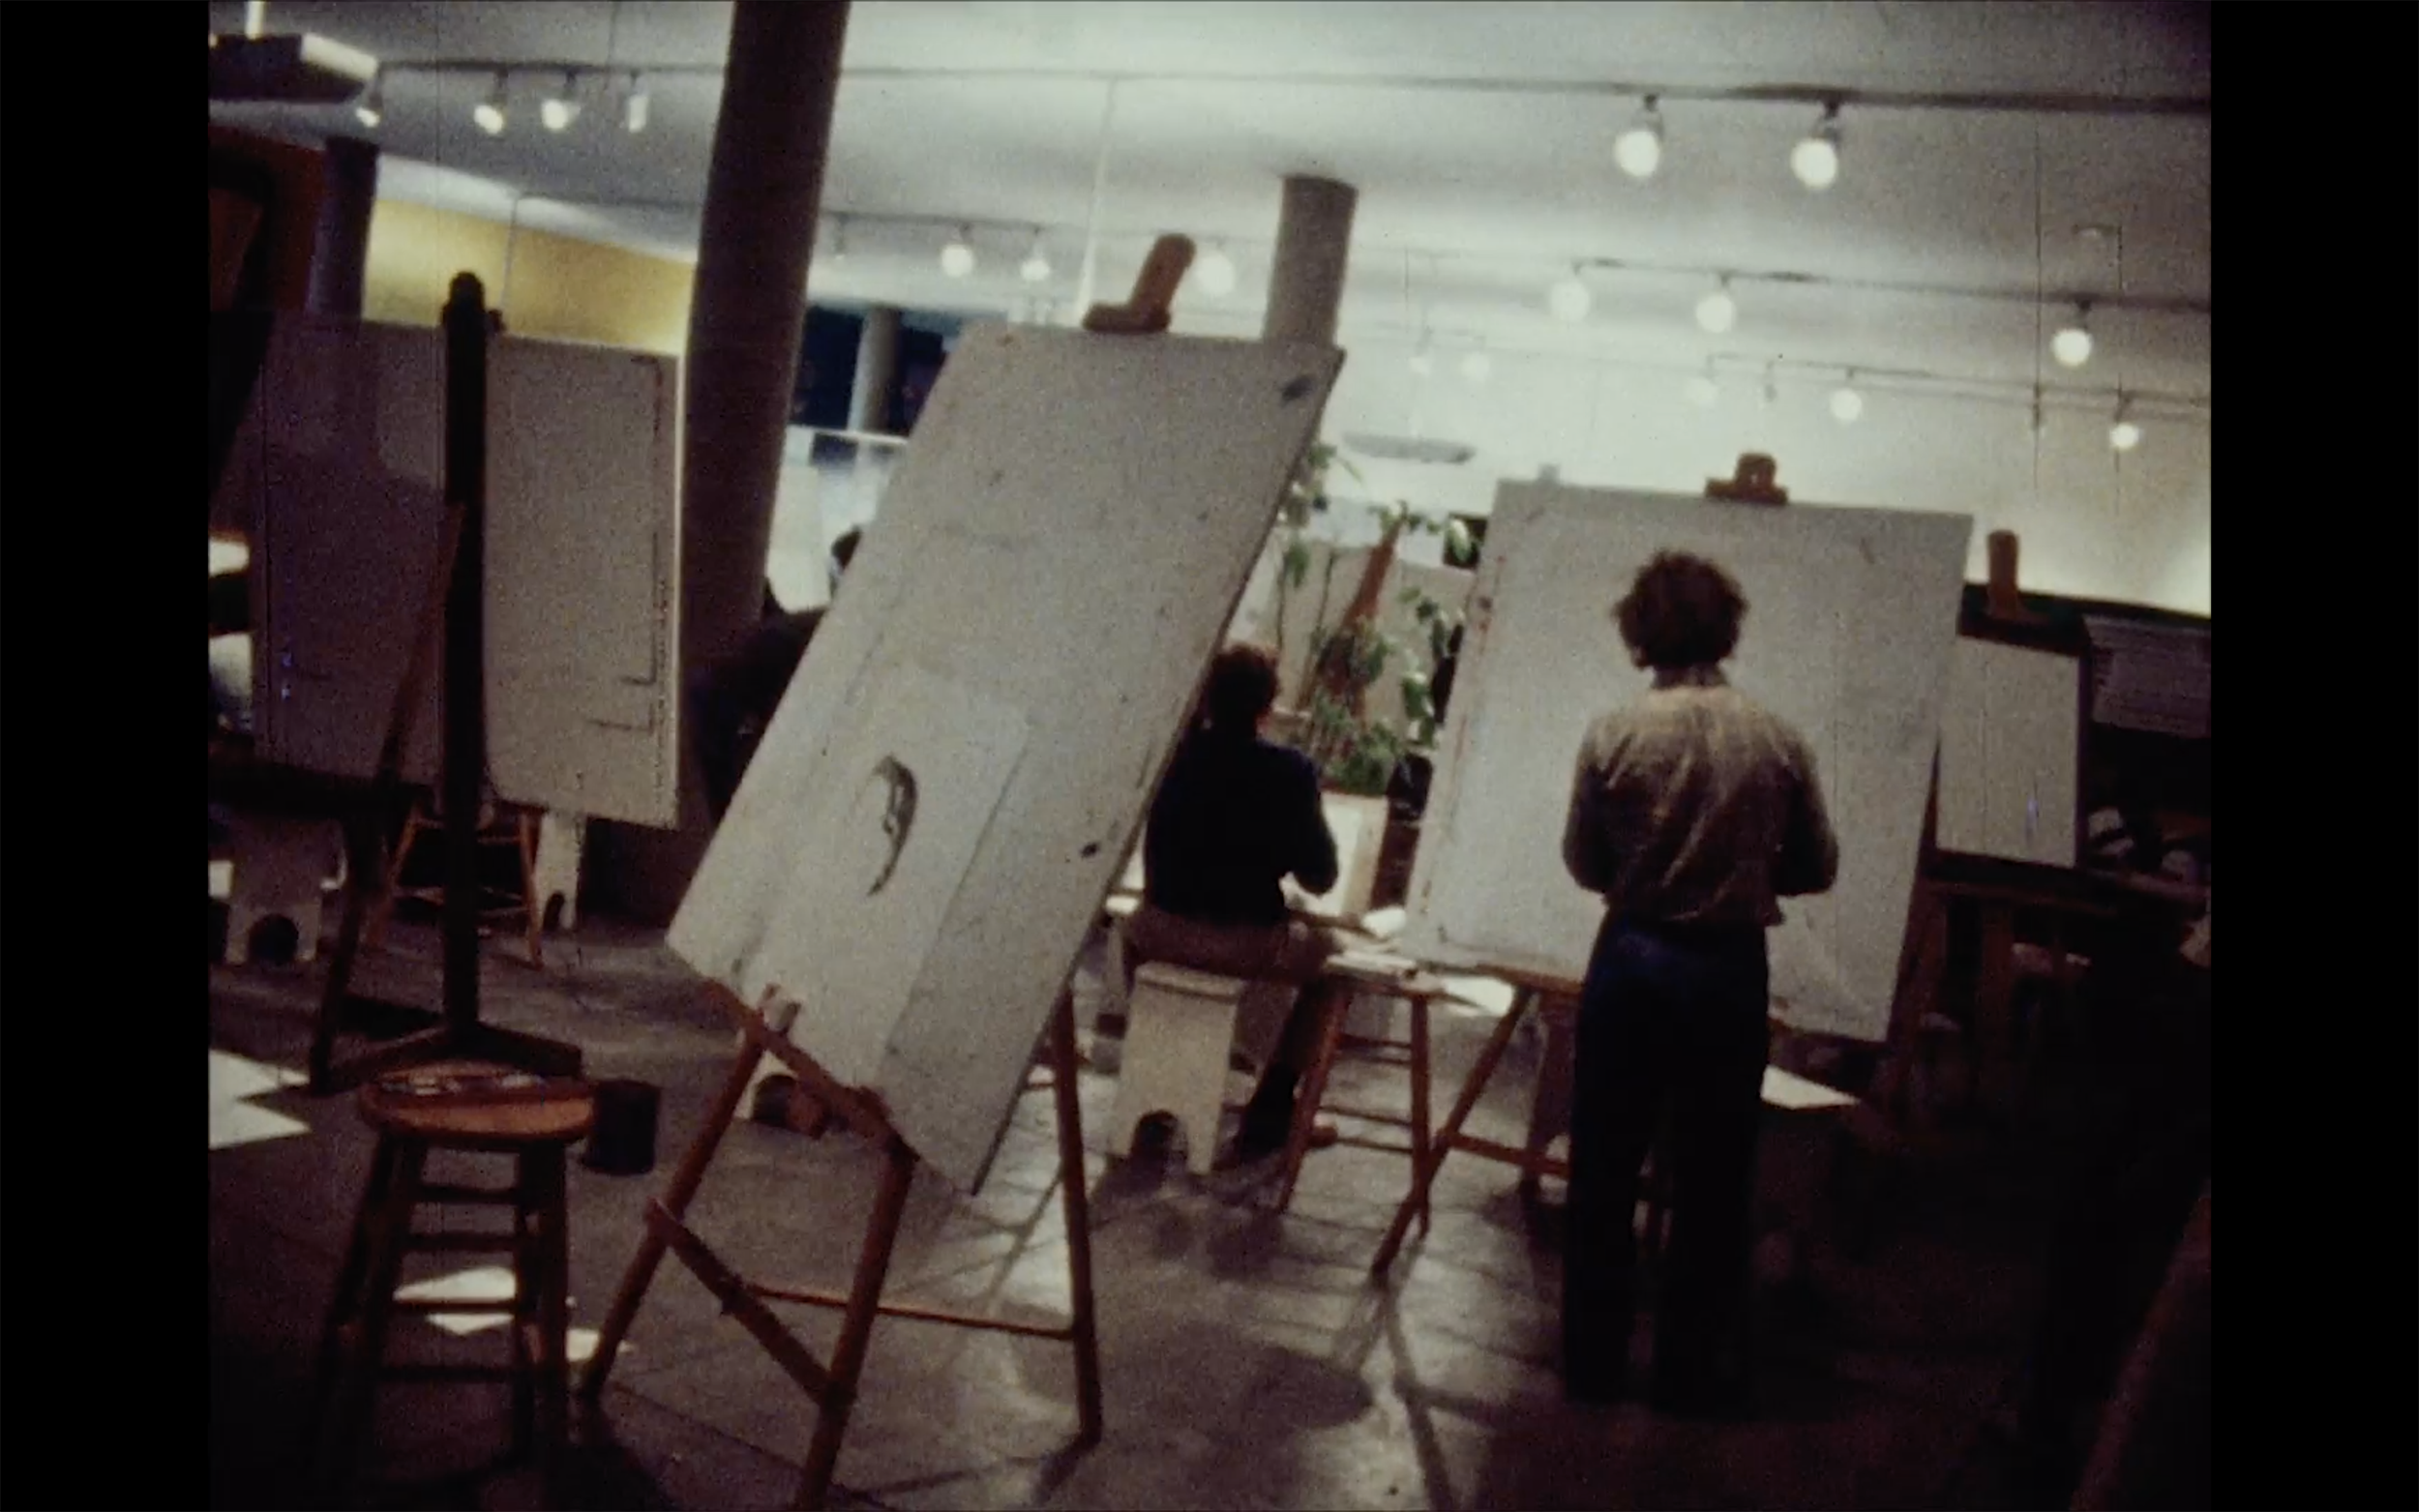 Students paint on canvases in Carpenter Center in 1971.